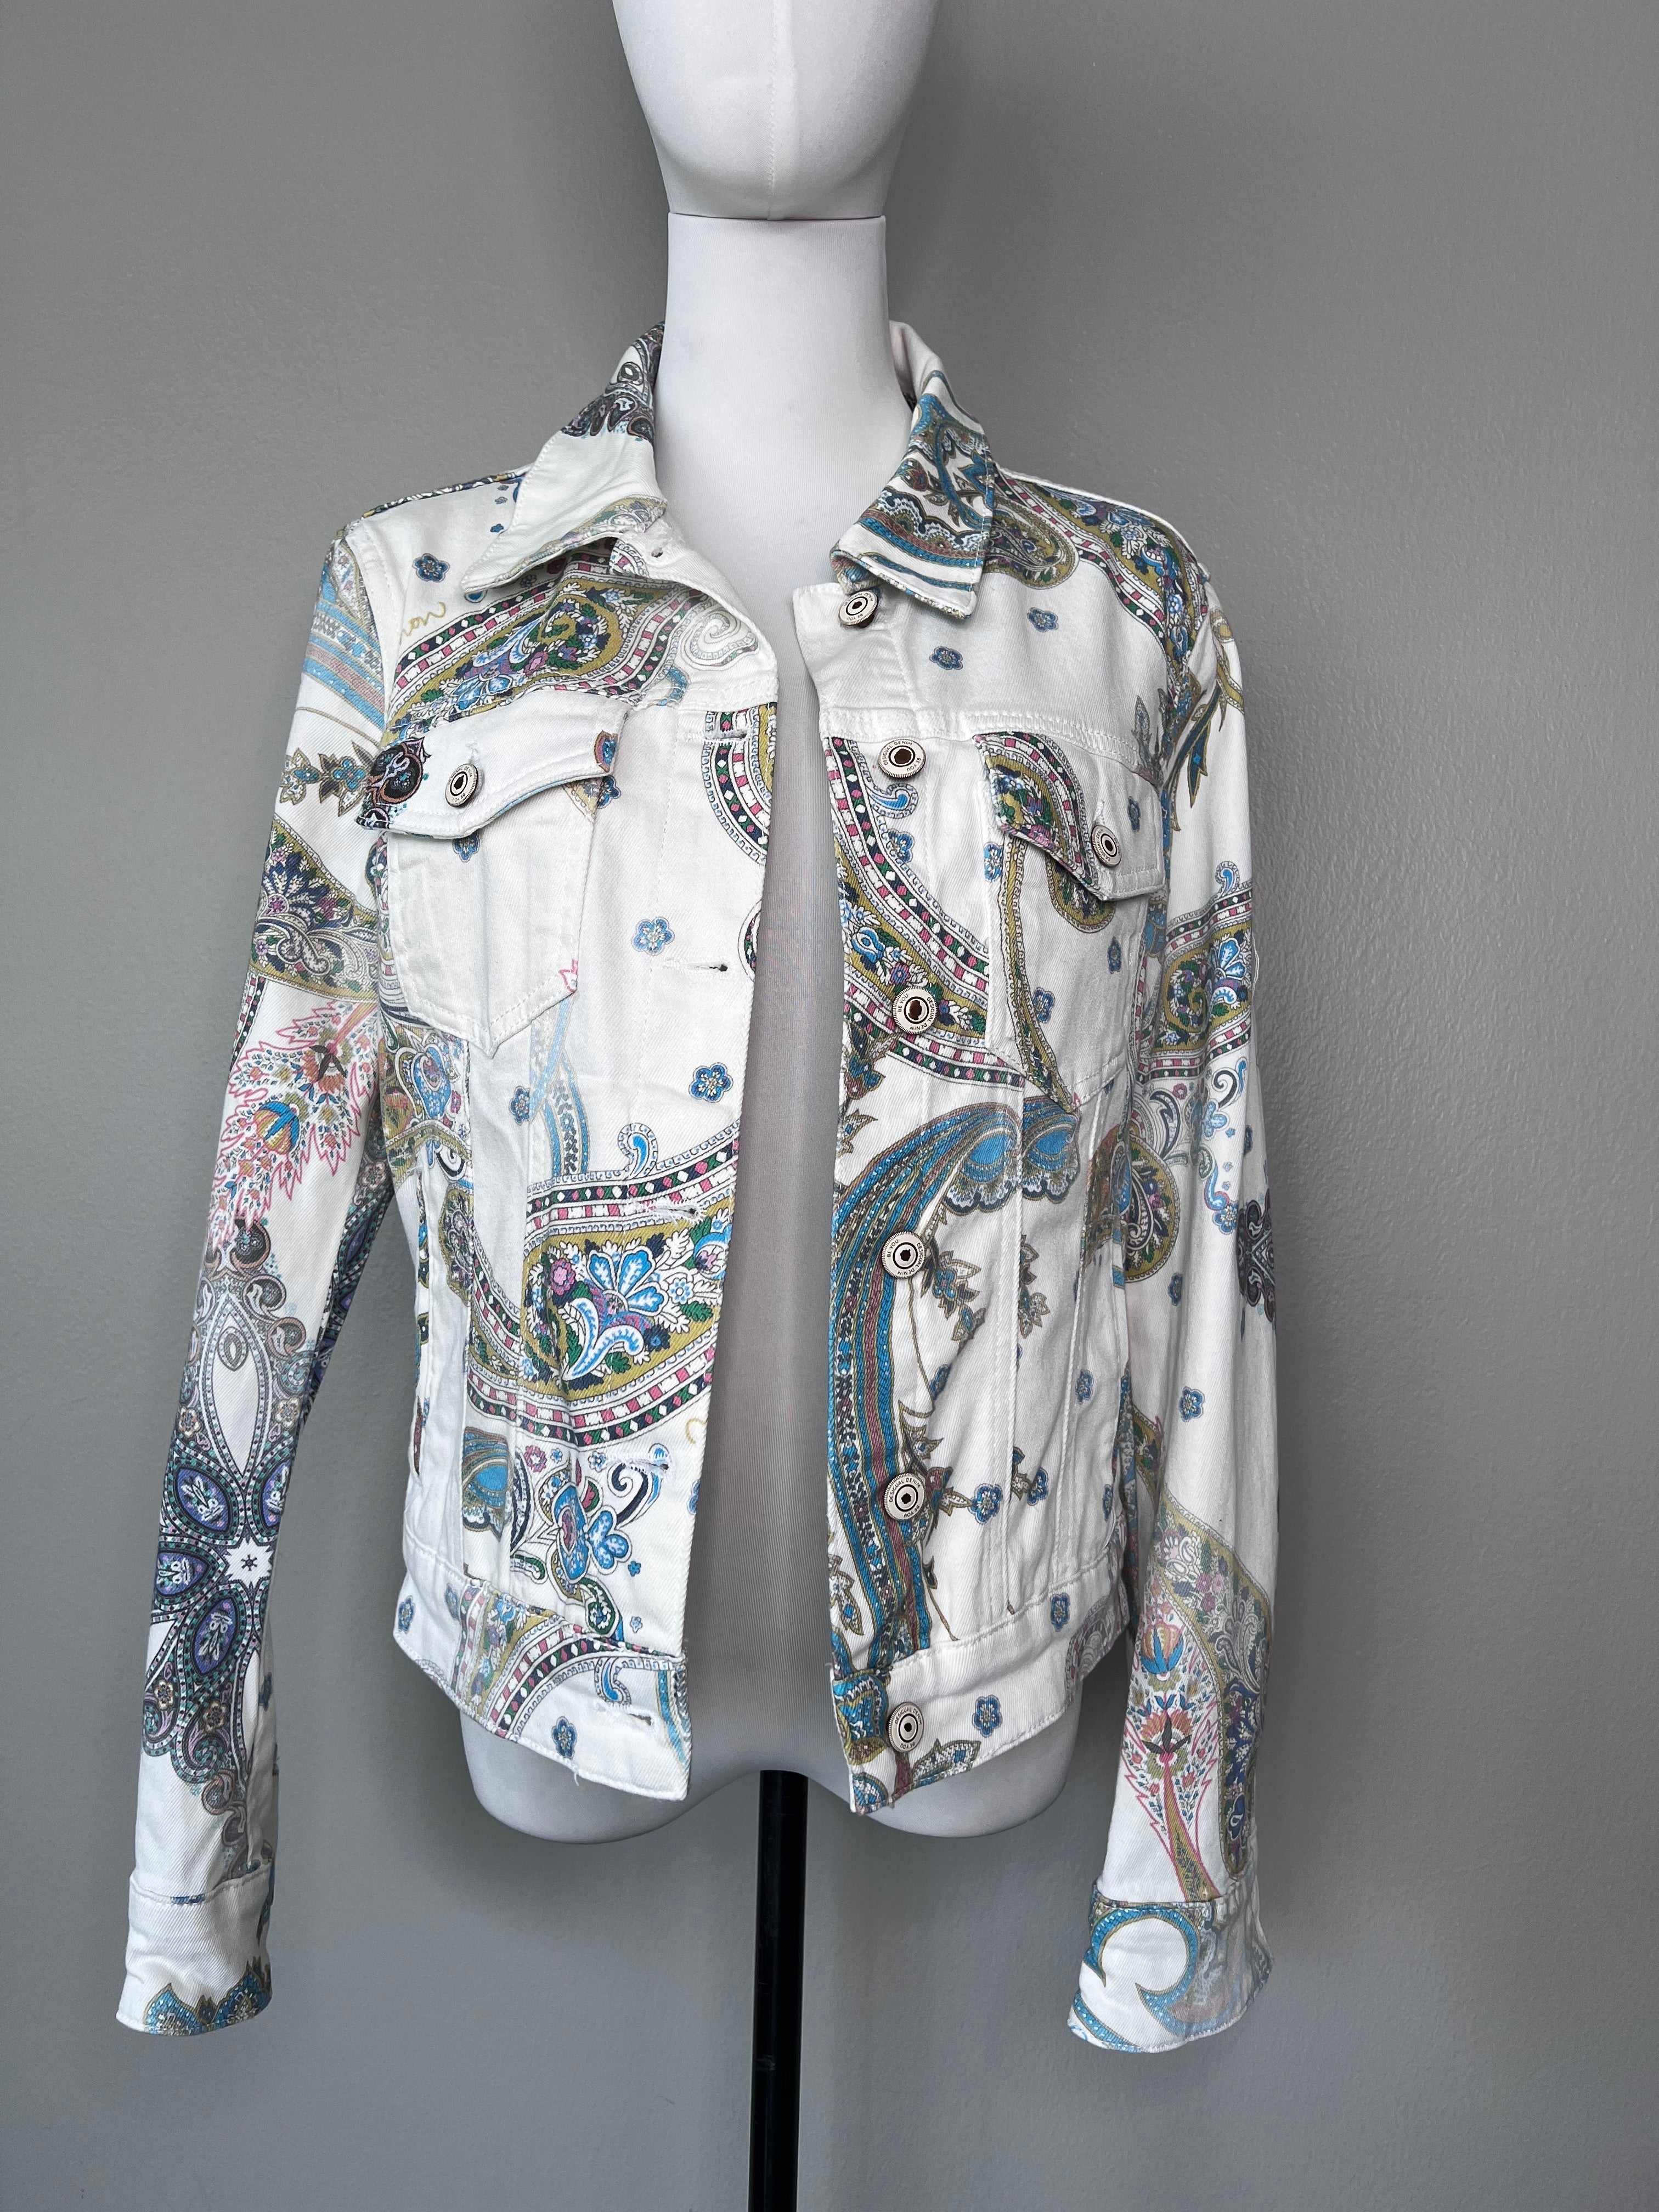 White denim jacket with multicolored bandana design throughout and buttons down the middle- DESIGUAL.